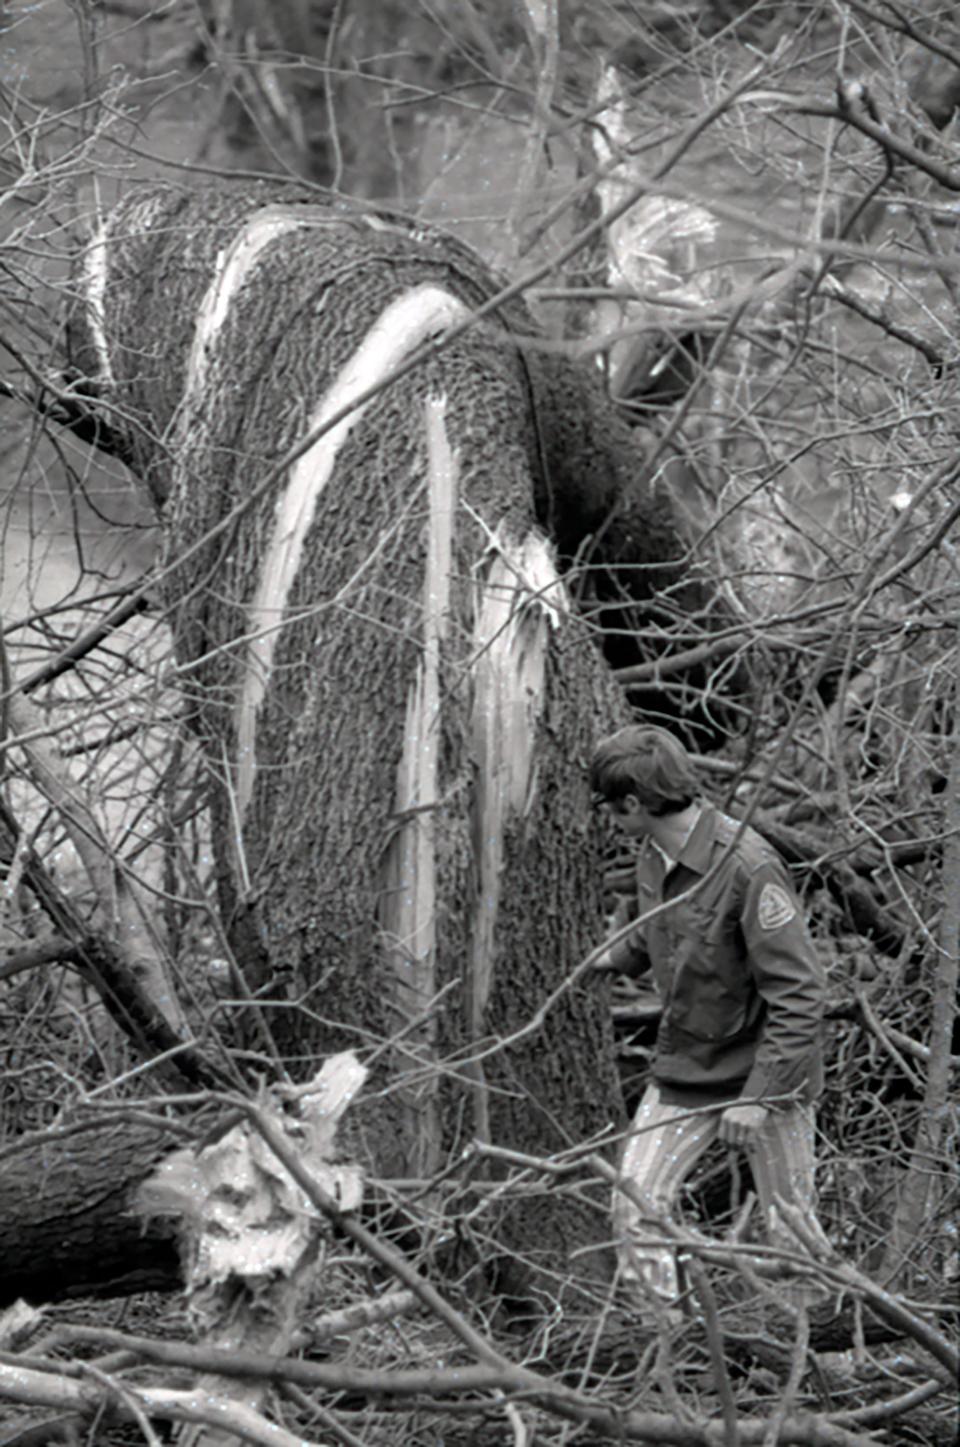 A twisted tree after the tornado outbreak in Louisville on April 3, 1974